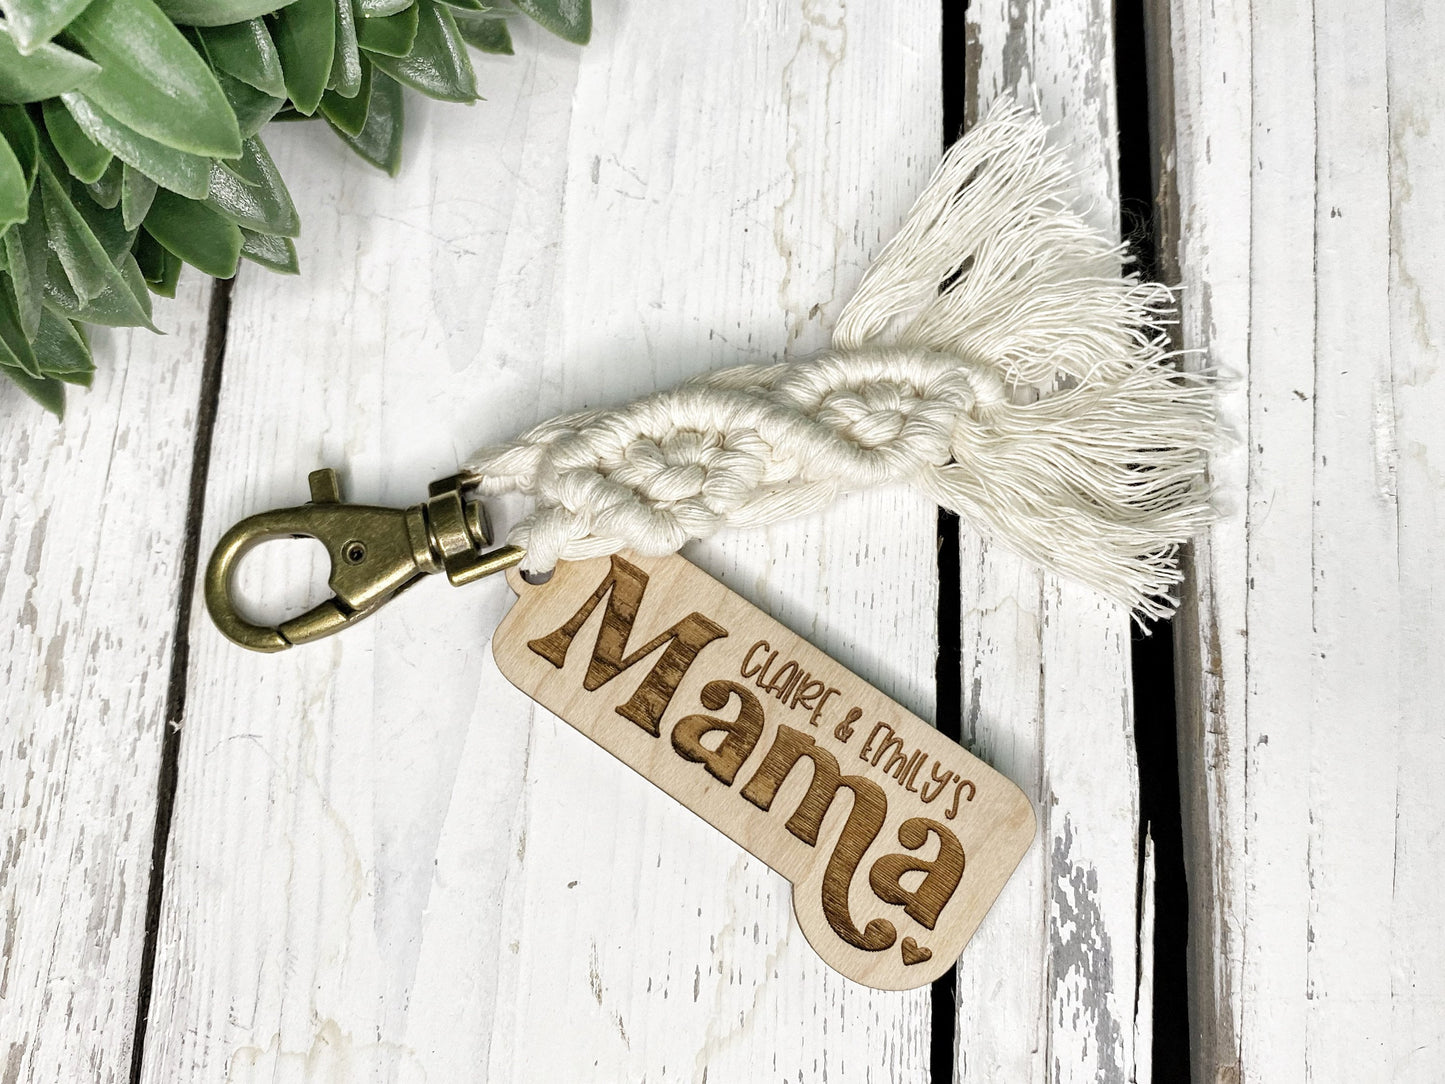 Mama Keychain, Personalized Mother's Day Gift, Boho Macrame Keychain, Wood Keychain, Engraved Kid's Names, Gift for Mom